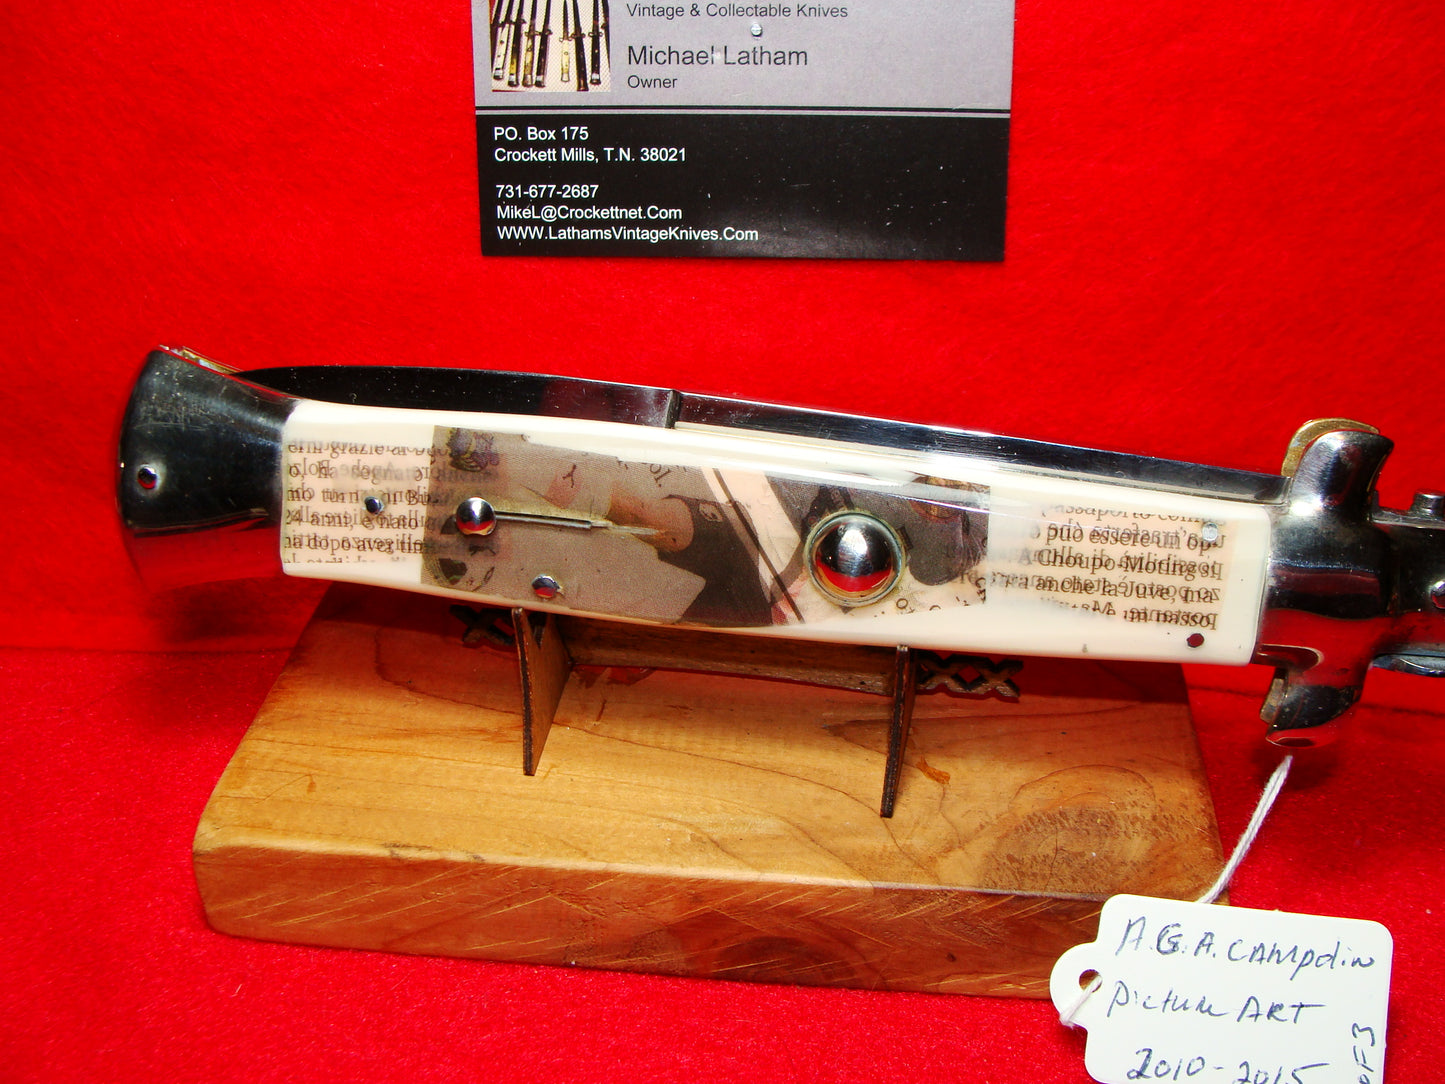 A.G.A. CAMPOLIN MADE IN ITALY 2010-2015 PICK LOCK STILETTO 38 CM ITALIAN AUTOMATIC KNIFE PICTURE ART HANDLES